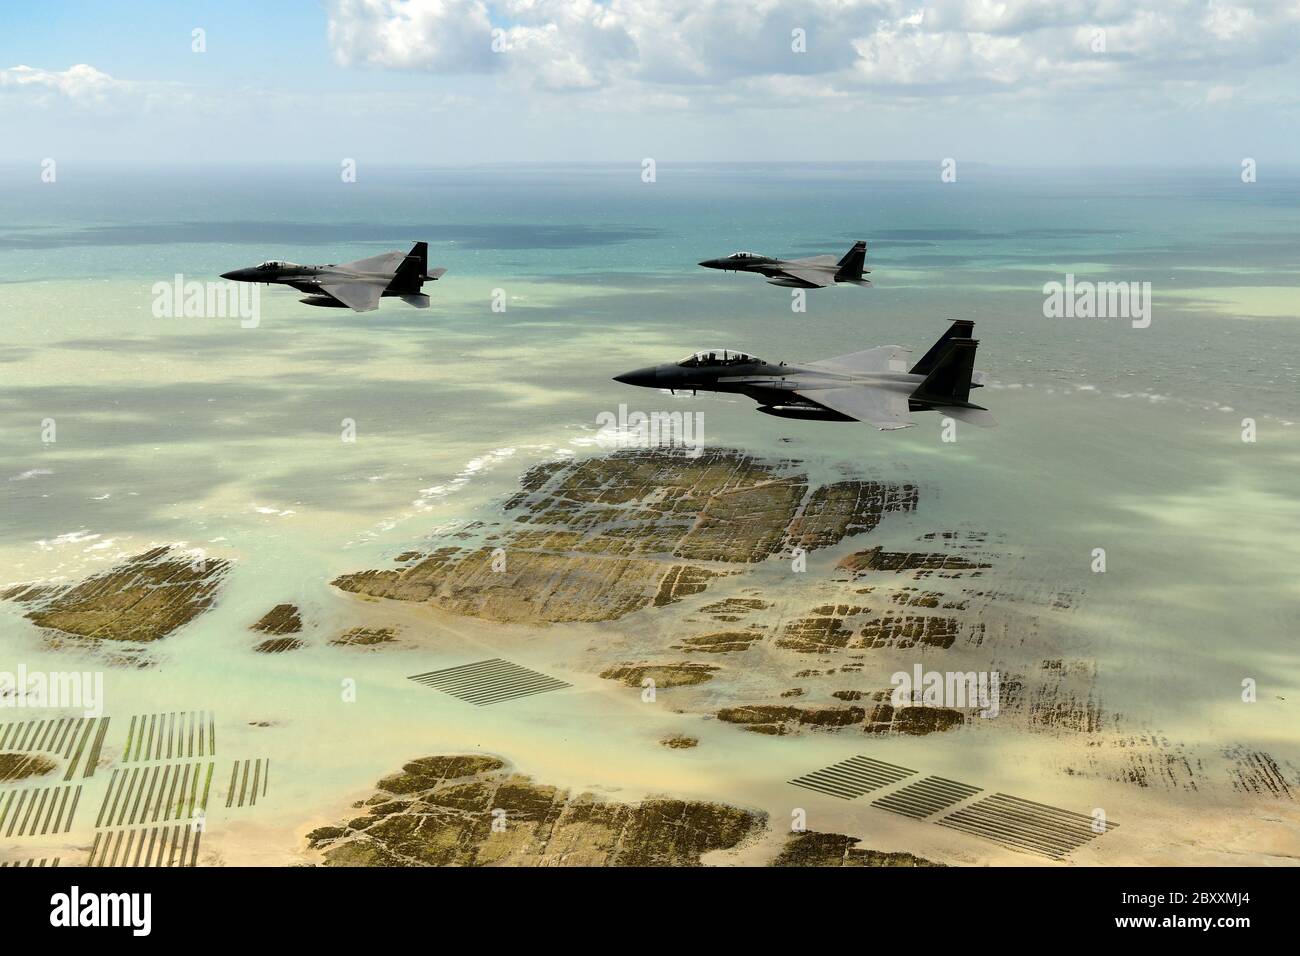 U.S. Air Force F-15 Eagle fighter aircraft, assigned to the 48th Fighter Wing conduct a flypast over the beaches and battle sites to mark the 76th anniversary of D-Day June 6, 2020 in Normandy, France. Stock Photo